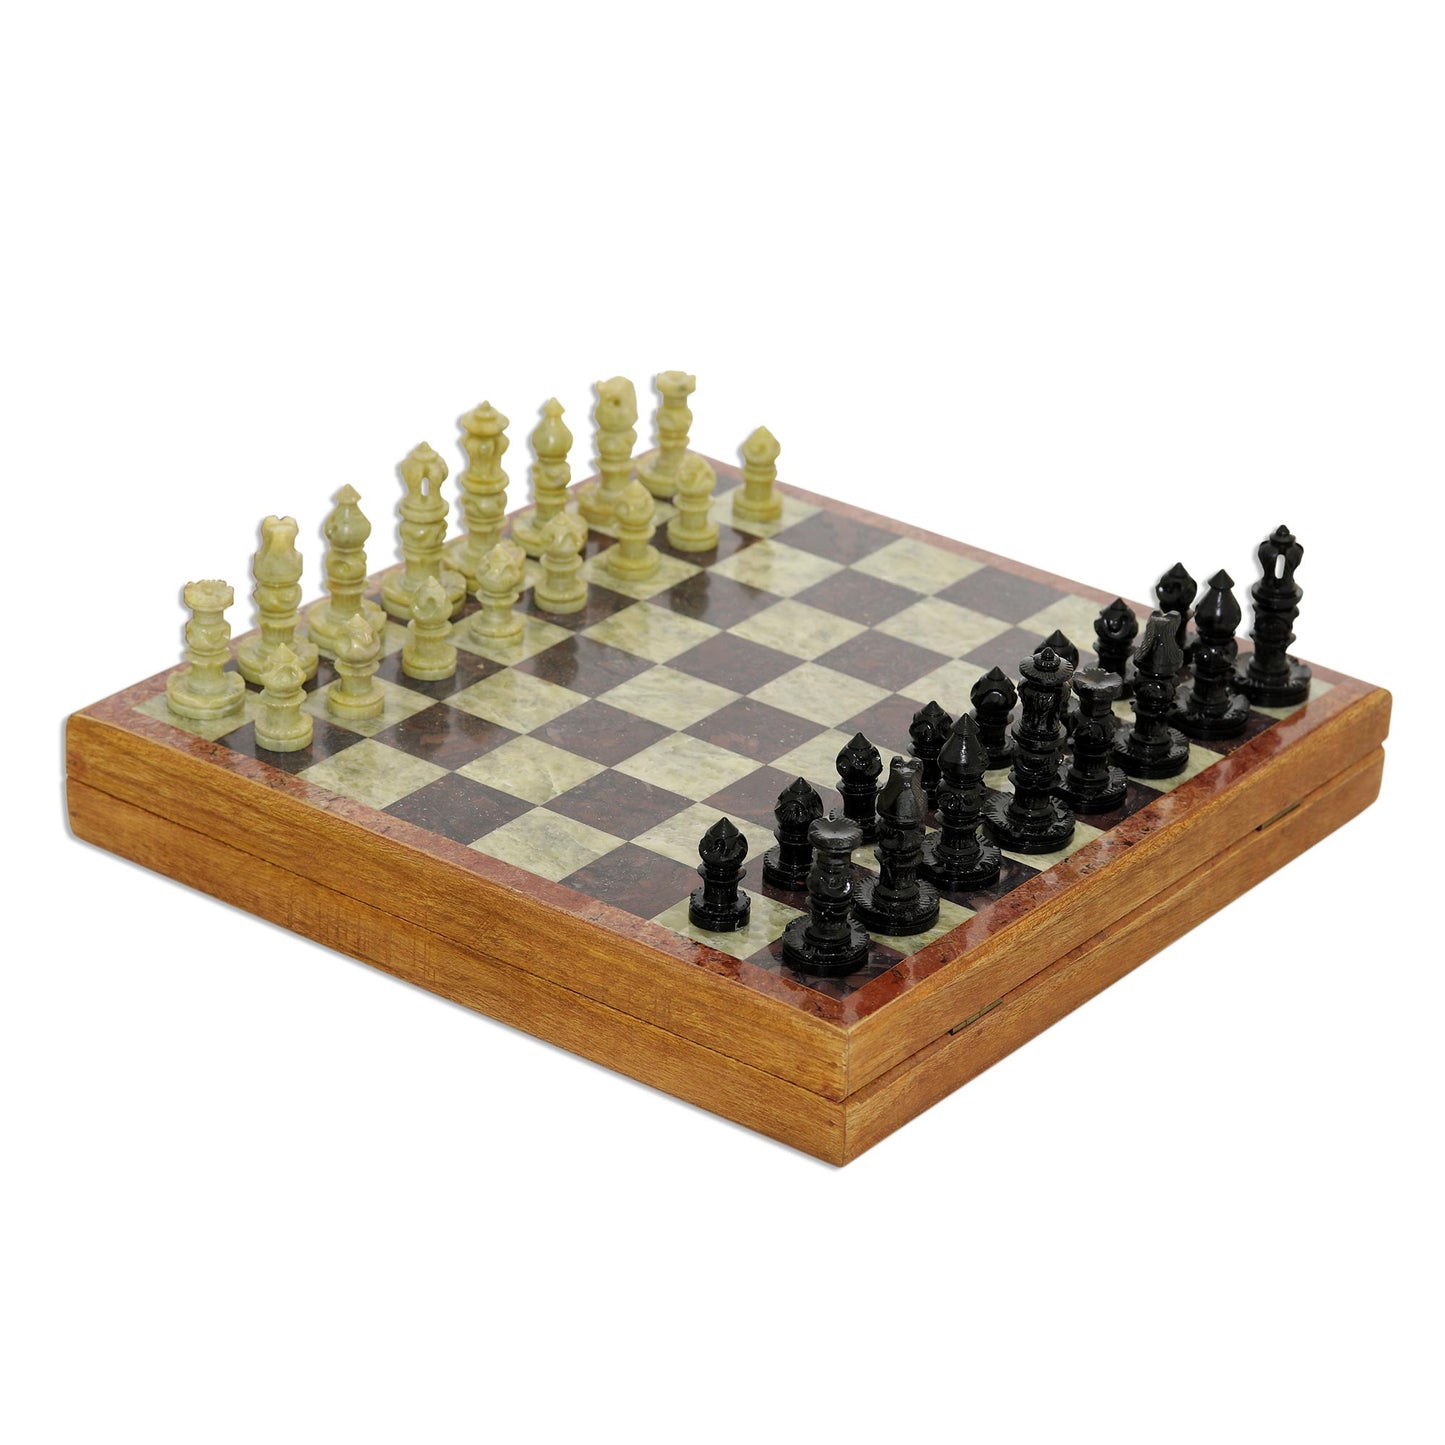 Royal Charm Soapstone Self-Storing Chess Set from India